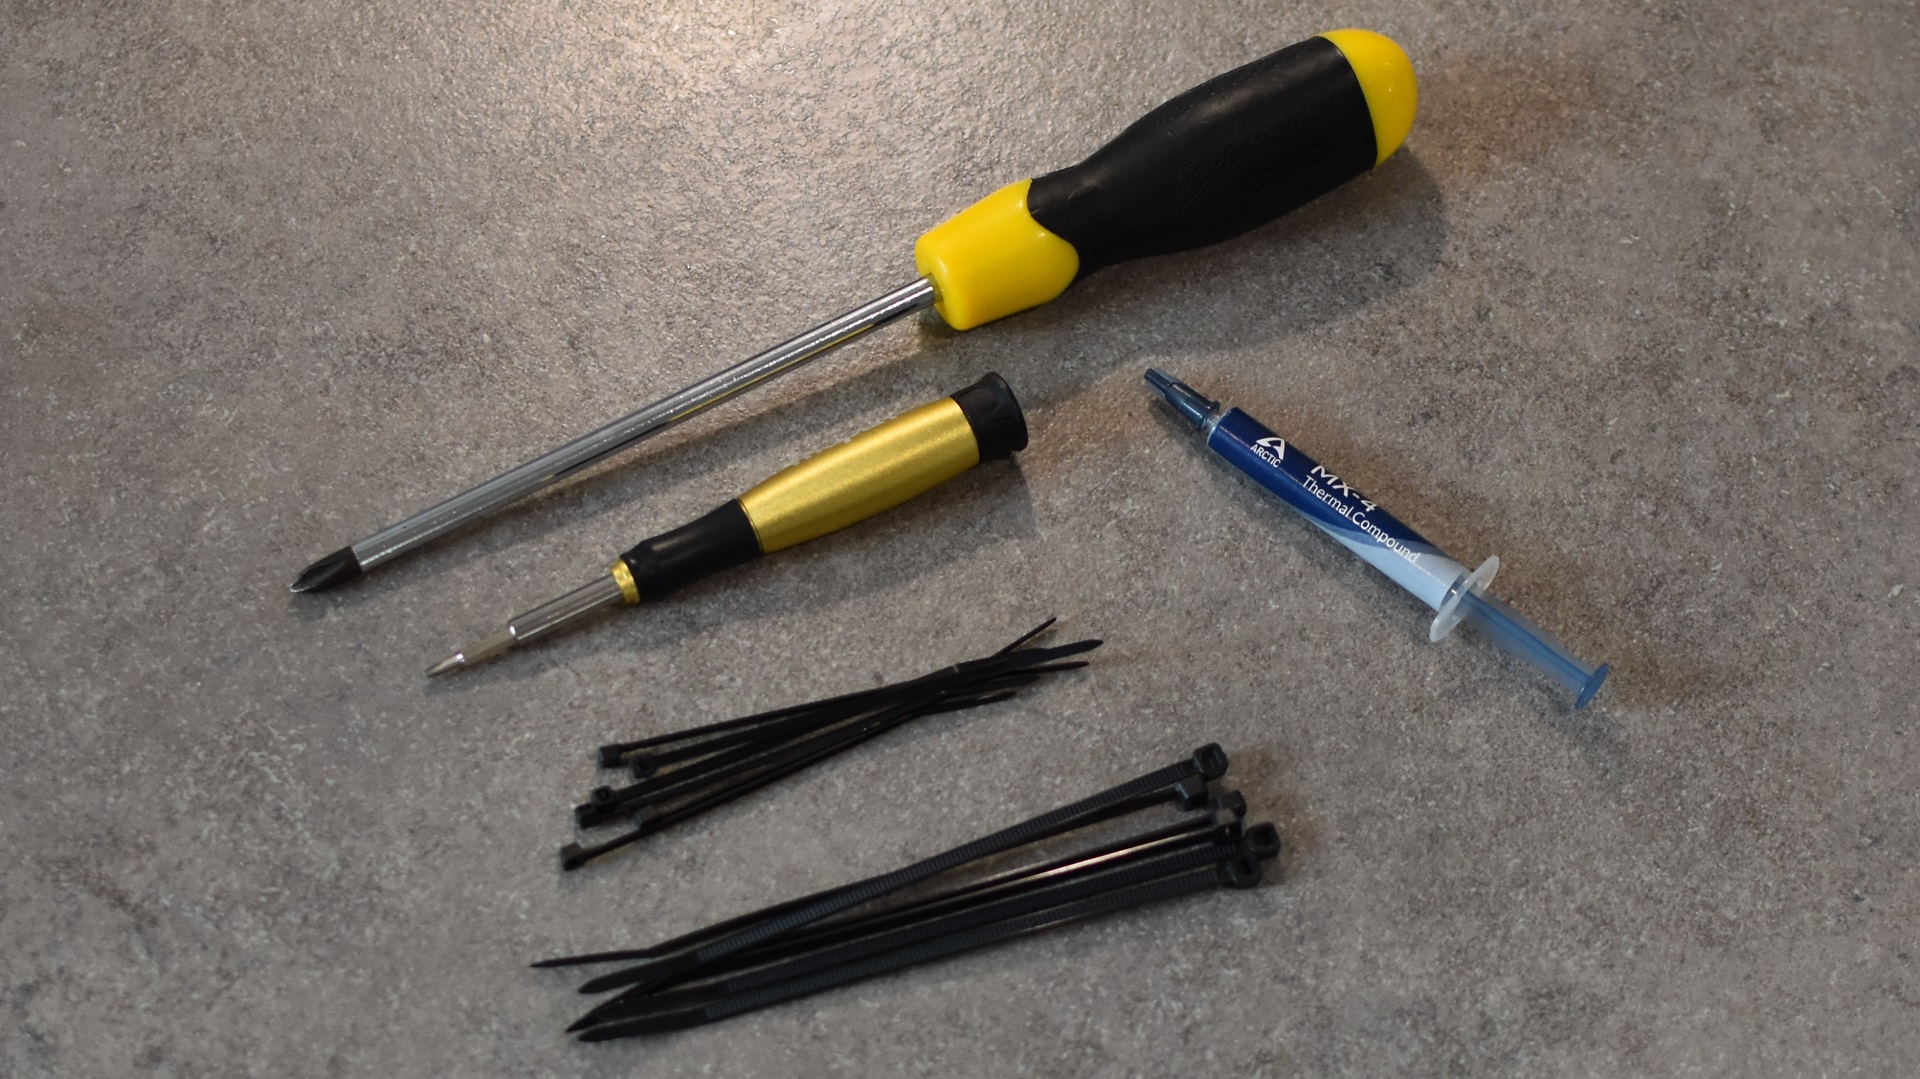 The tools you'll need to build a PC: crosshead screwdrivers, thermal paste, and cable ties.